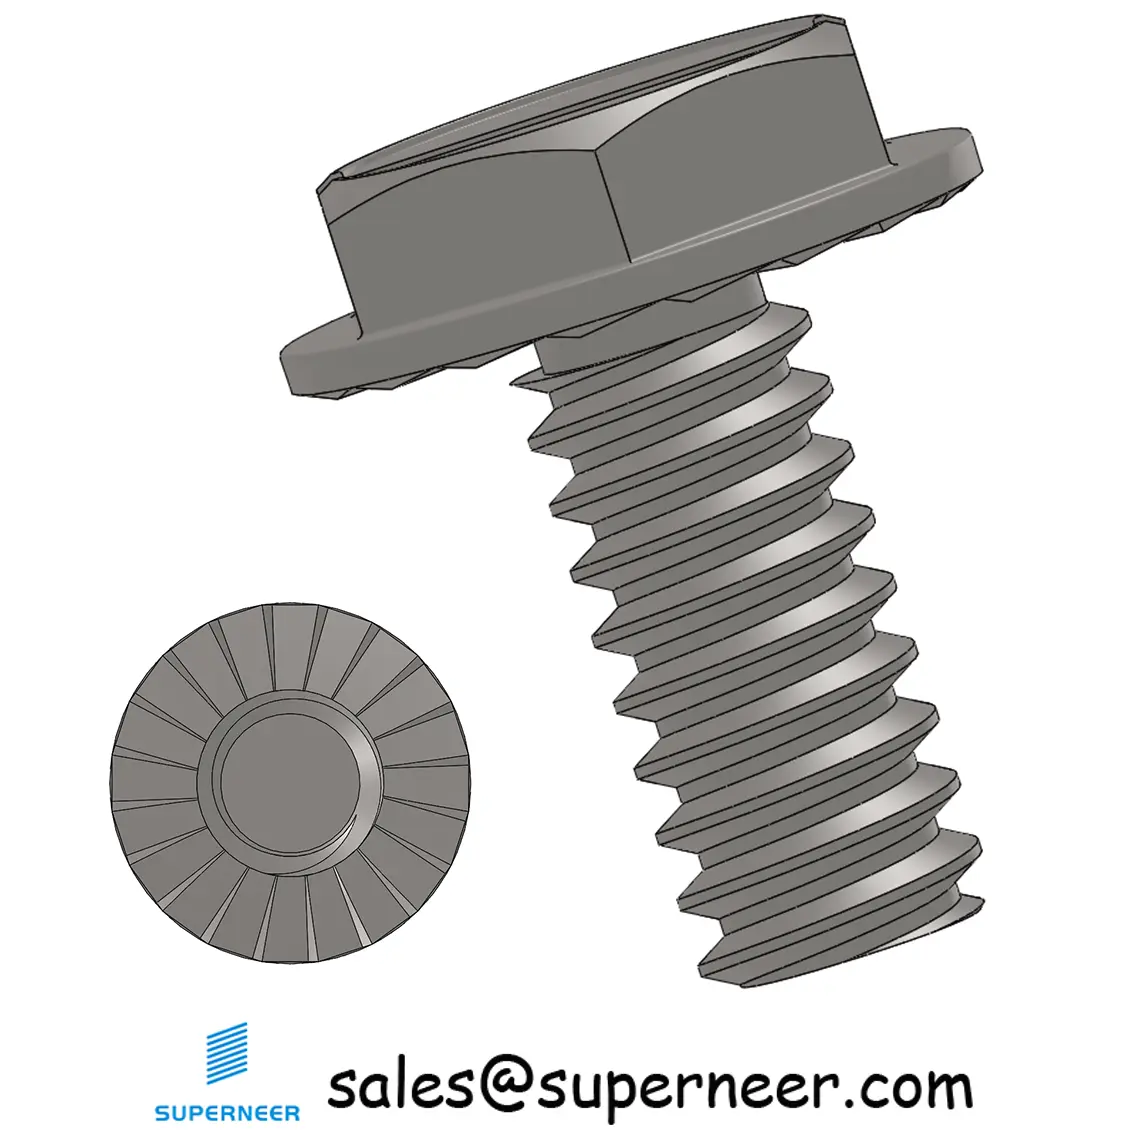 6-32 x 5/16" Indented Hex Washer Serrated Head Slotted Machine Screw SUS304 Stainless Steel Inox